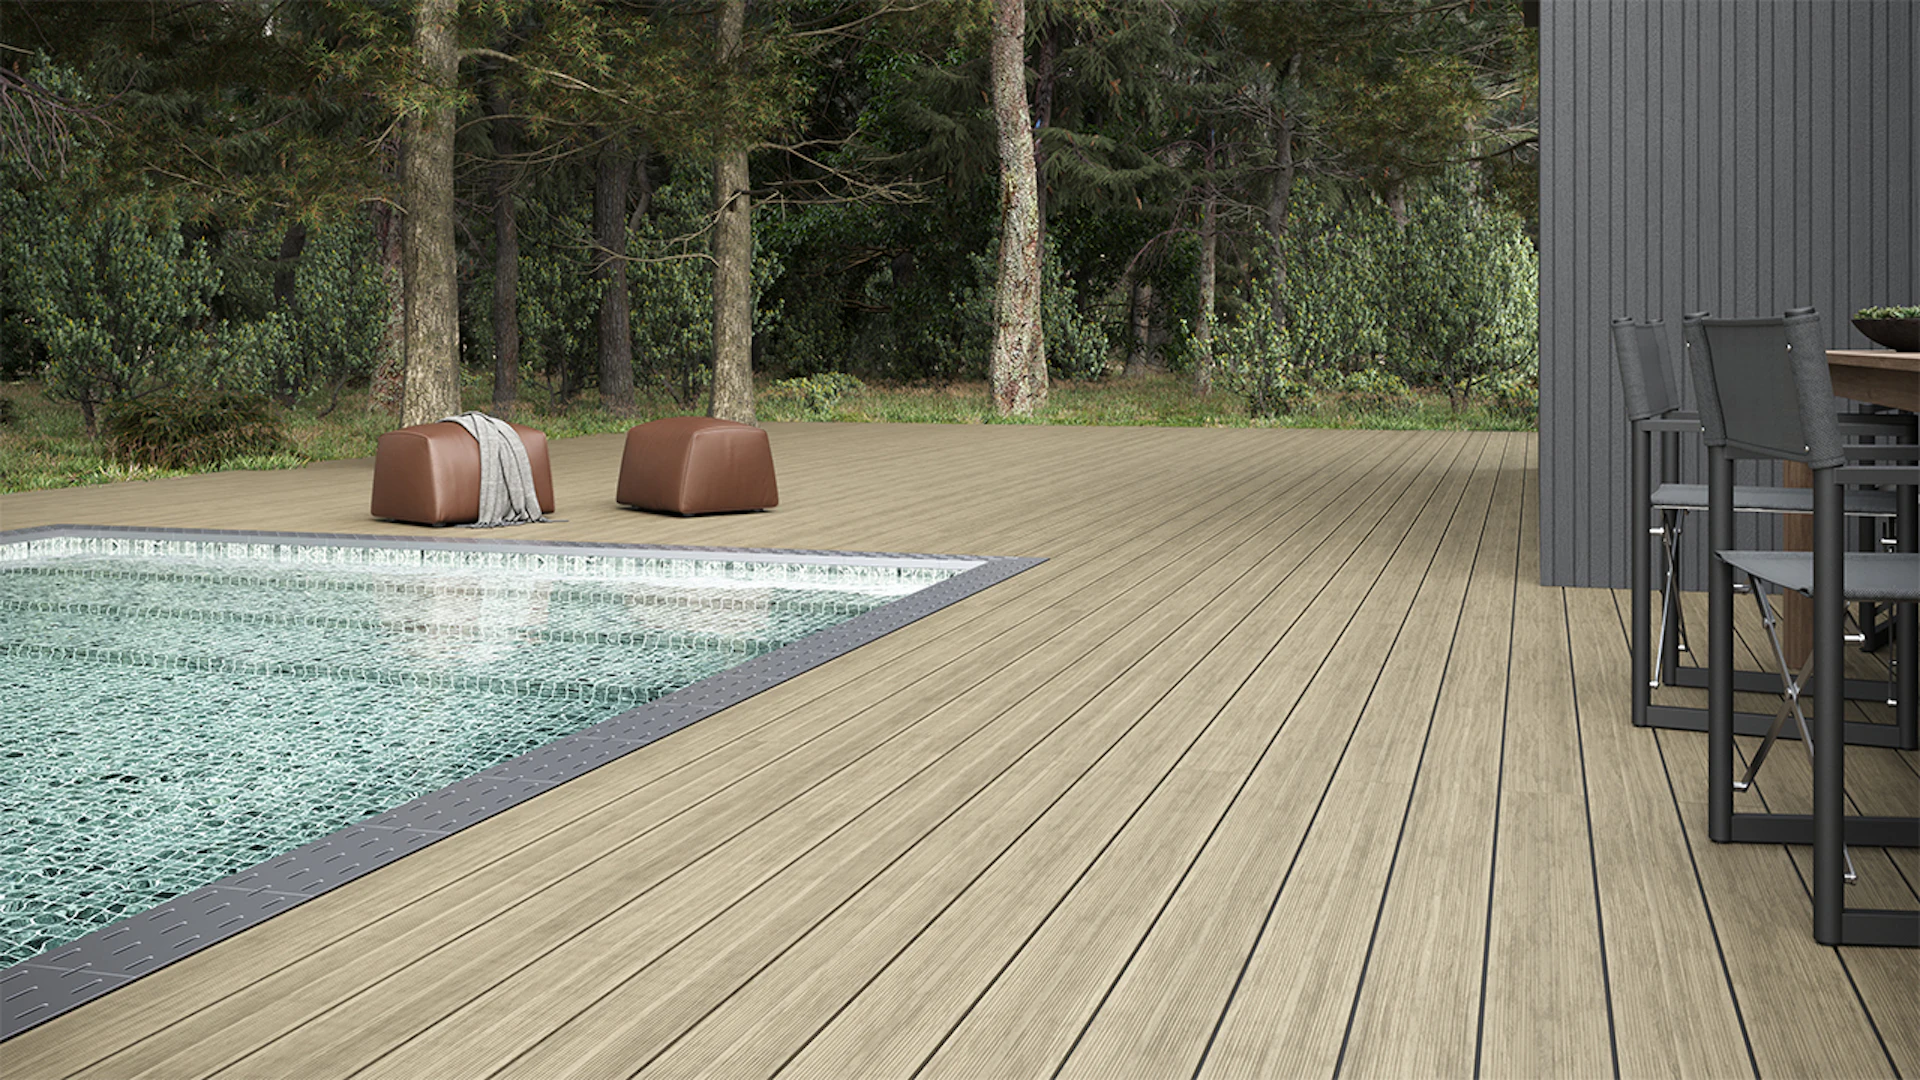 planeo WPC decking plank 4m - solid plank beige - grooved/textured